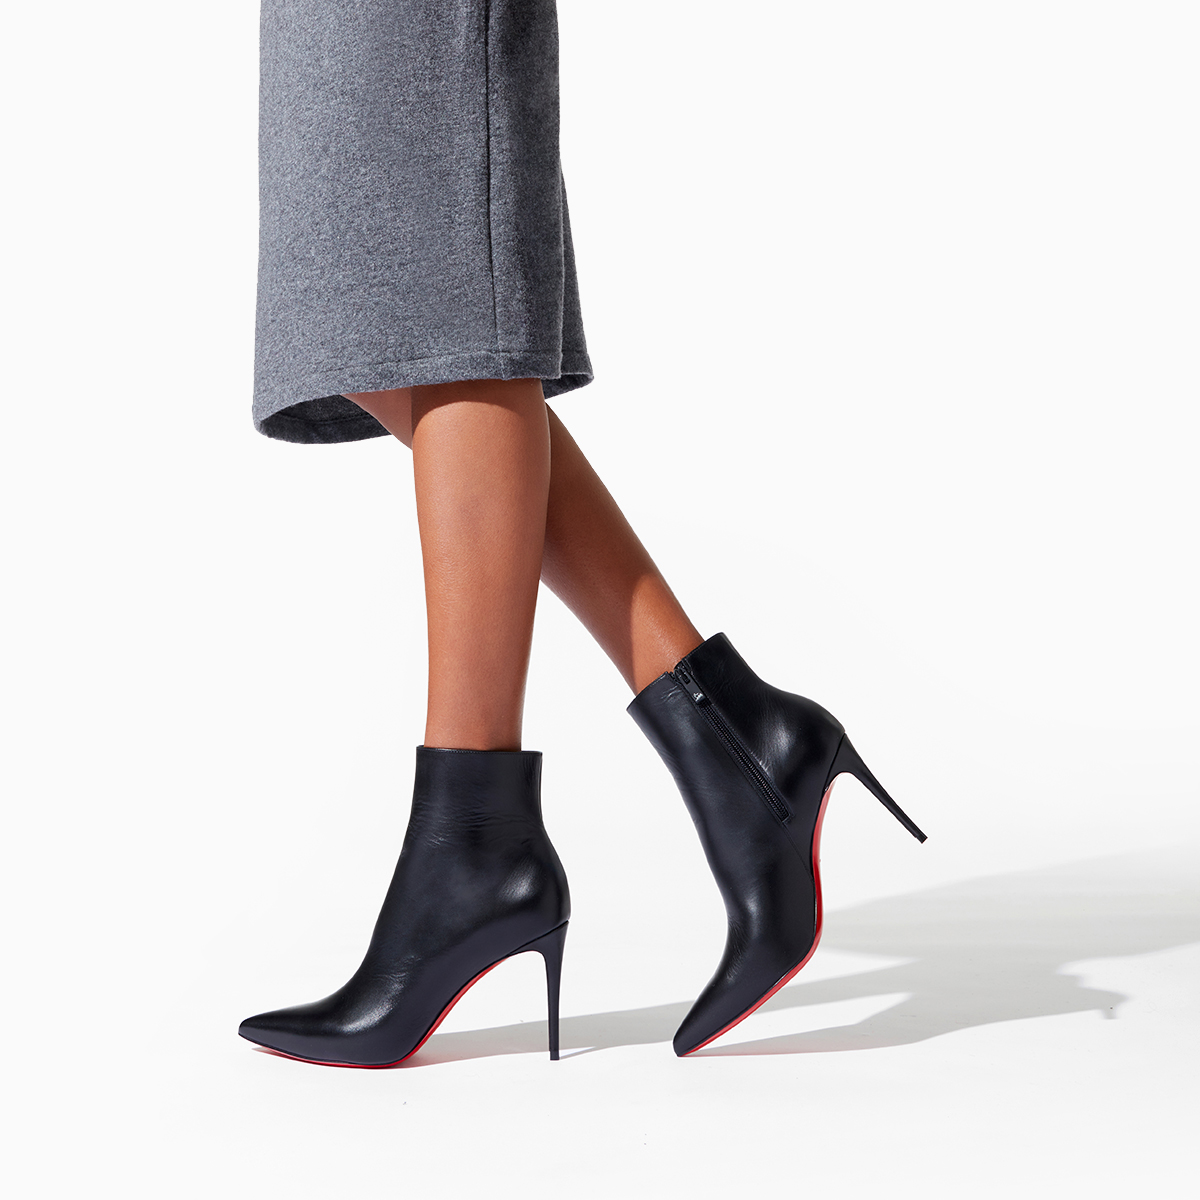 Christian Louboutin So Kate Booty 85 Leather Ankle Boots - Women - Black Boots - IT34.5